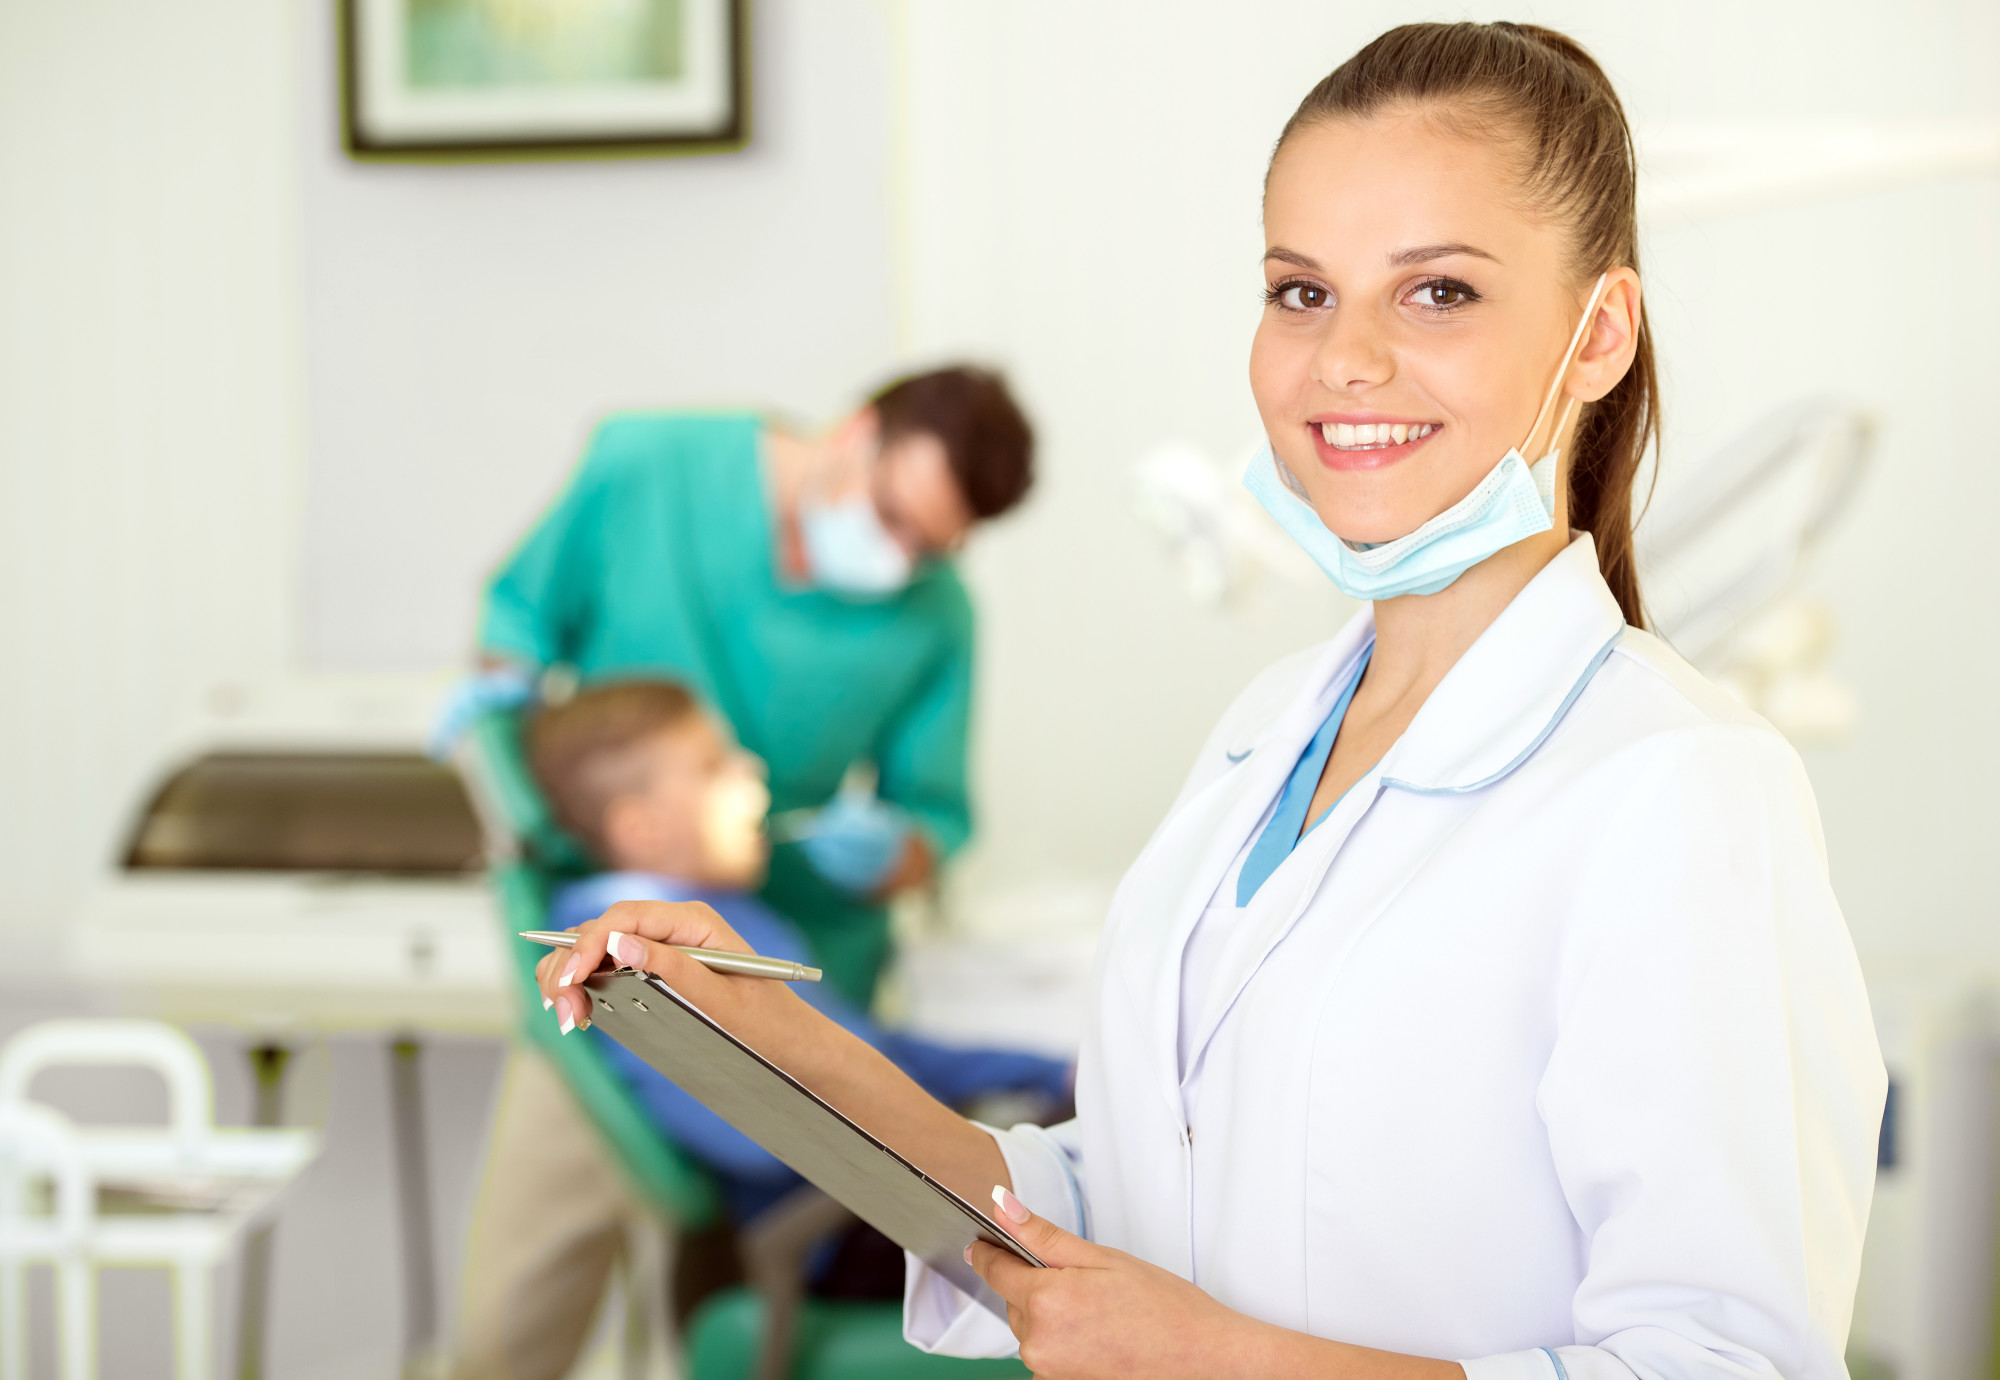 Dental assistant jobs in canada